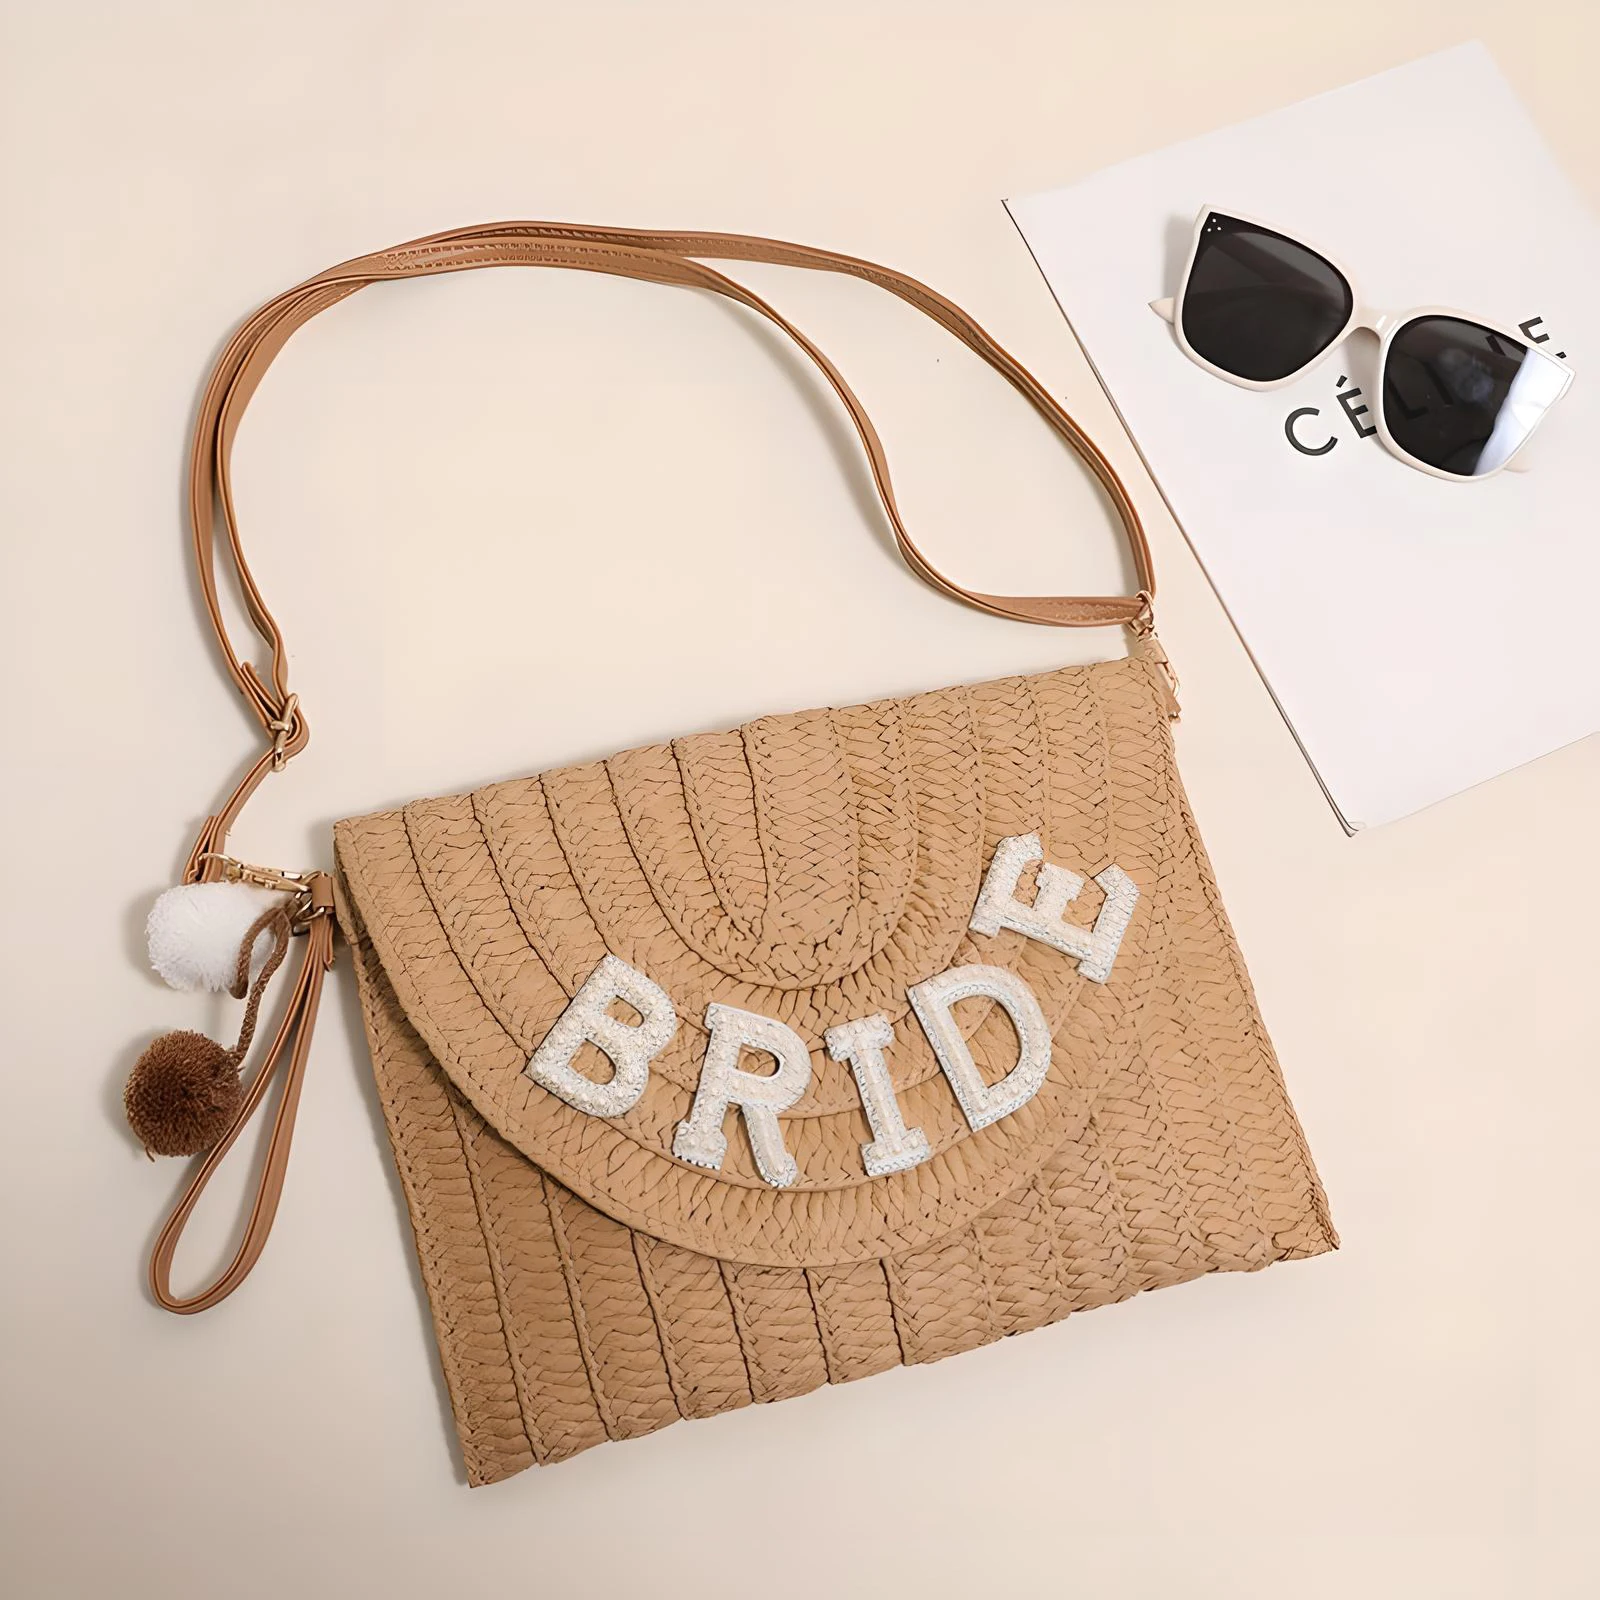 

Retro Square Straw Bag Fashion Paper Rope Hook Hand-Woven With Letter Casual Handbags Beach Travel Girls Crossbody Flap Bags